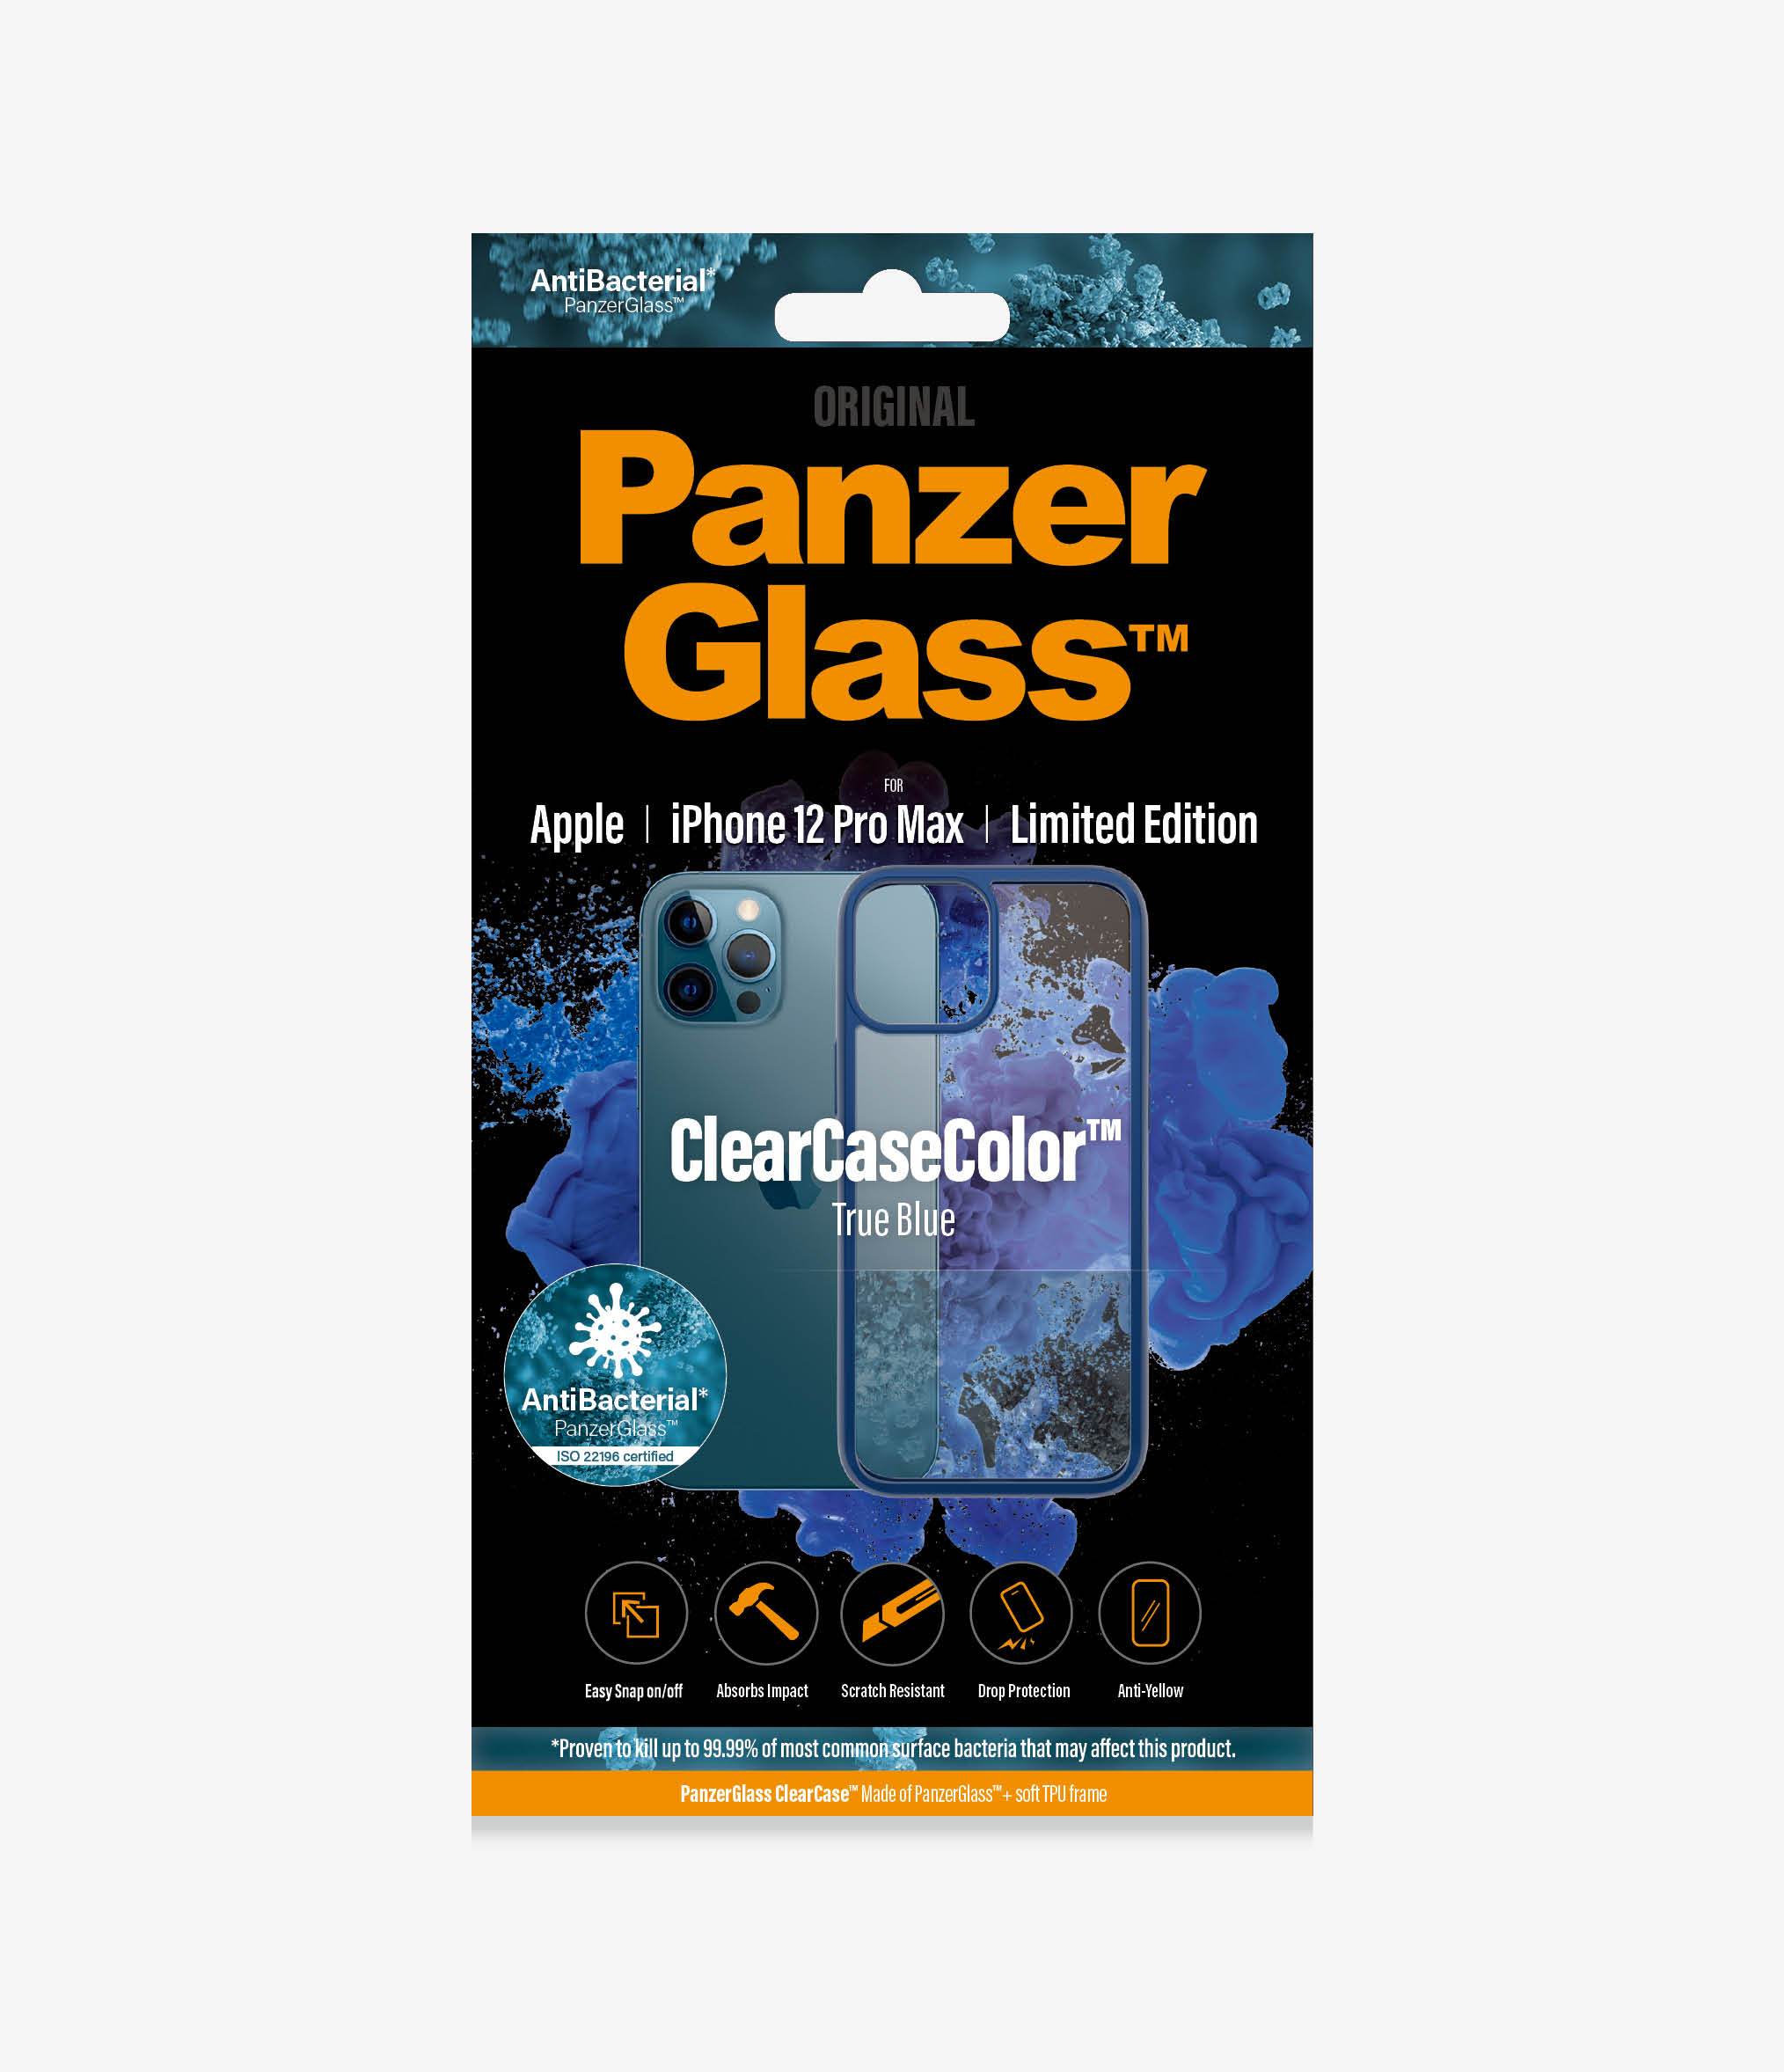 PanzerGlass™ ClearCaseColor™ Apple iPhone 12 Pro Max - True Blue Limited Edition (0278), Slim fashionable design, Tempered anti-aging glass back